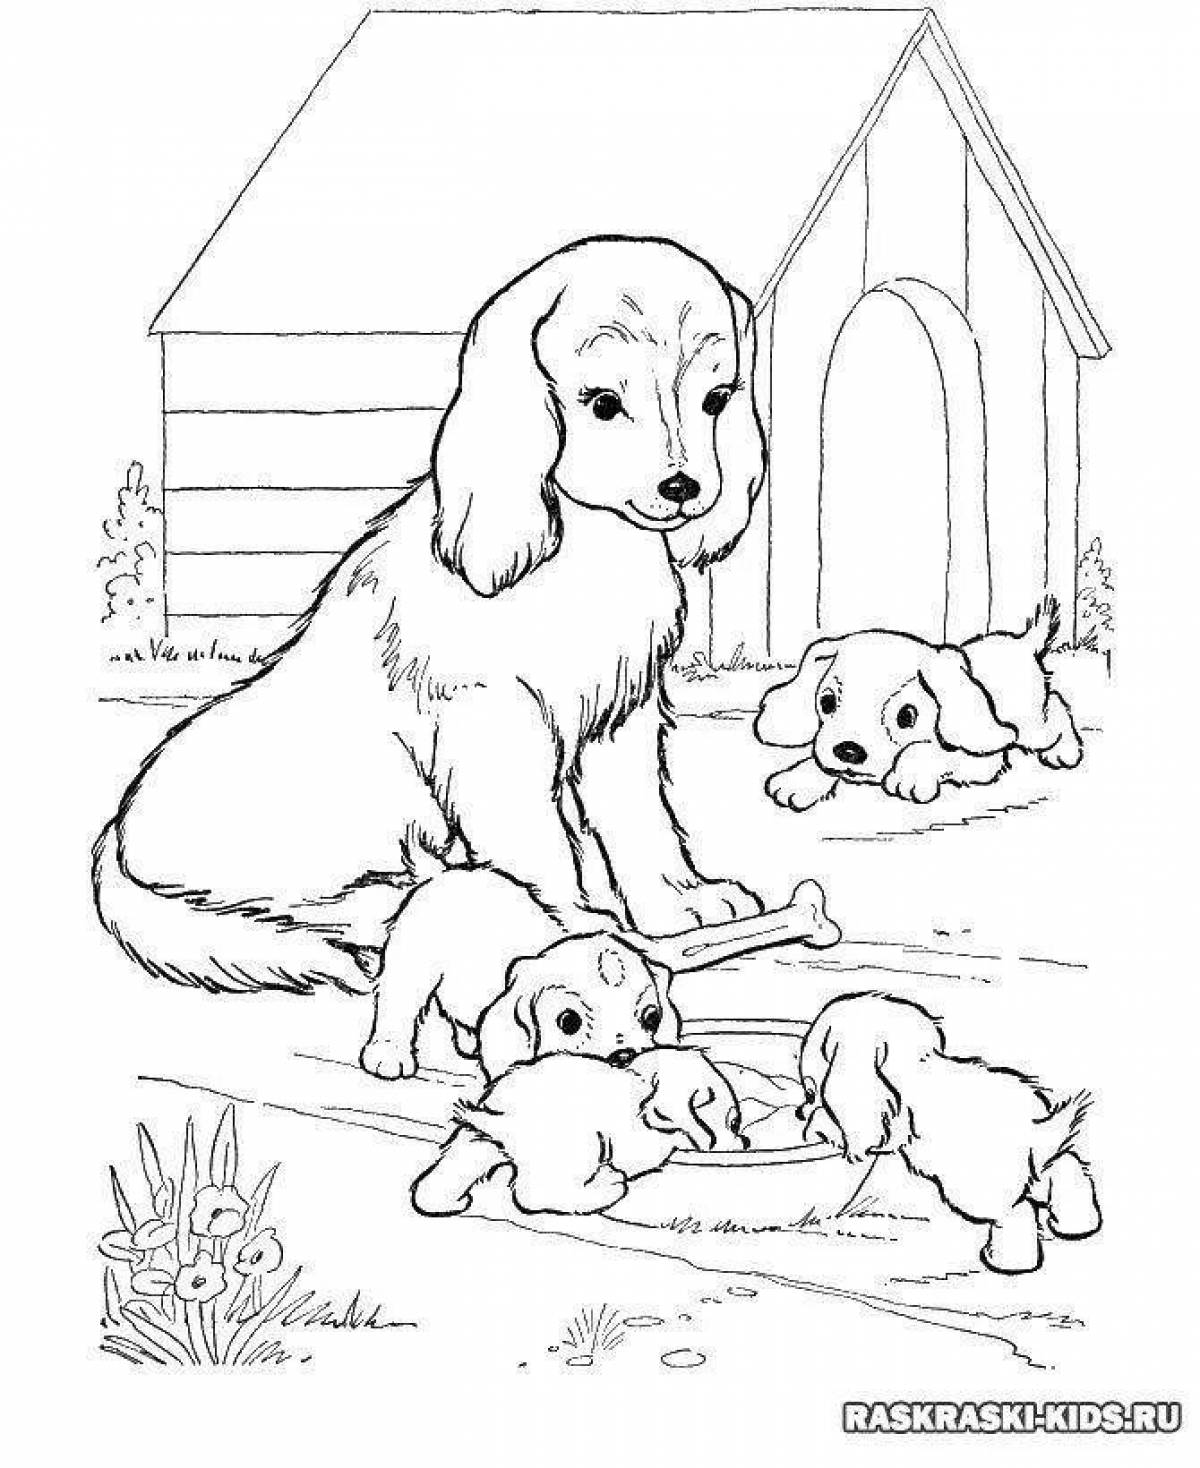 Adorable dog drawing coloring book